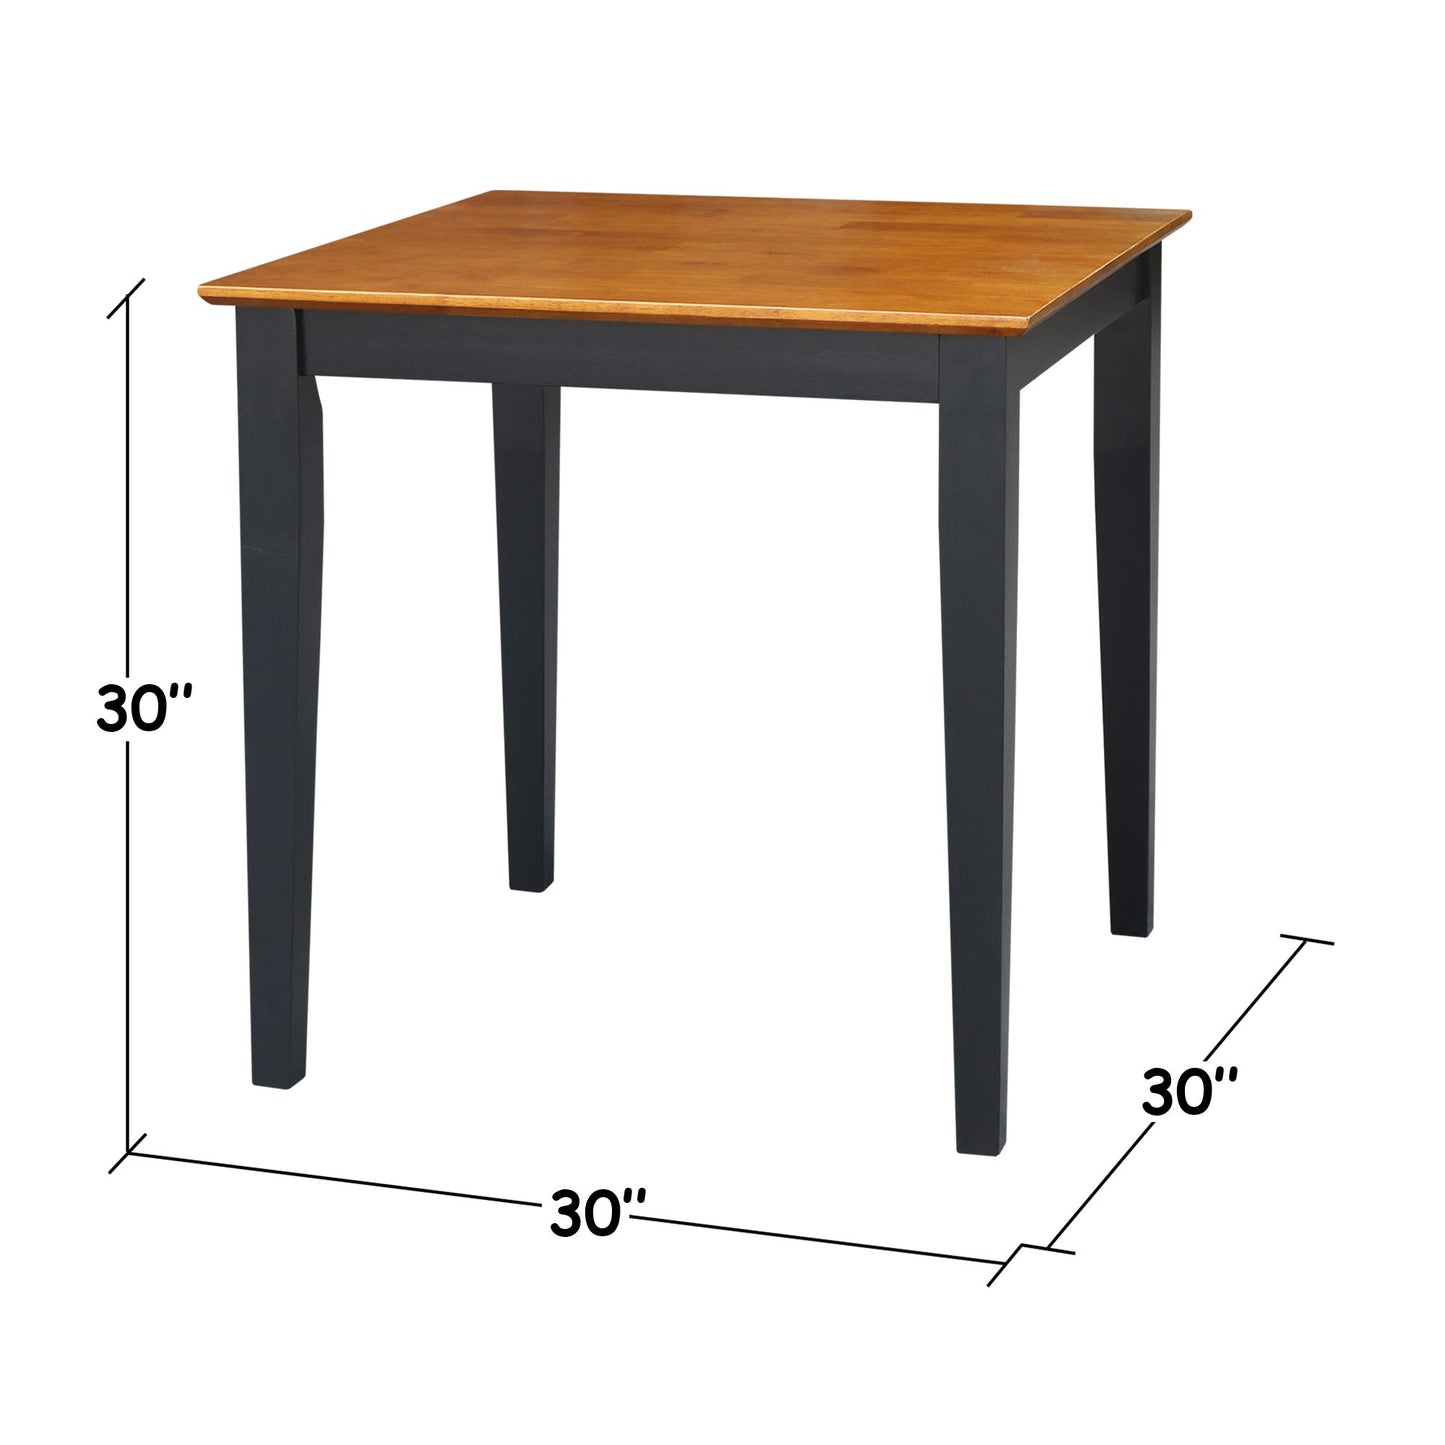 IC International Concepts Dining Table, Black/Cherry